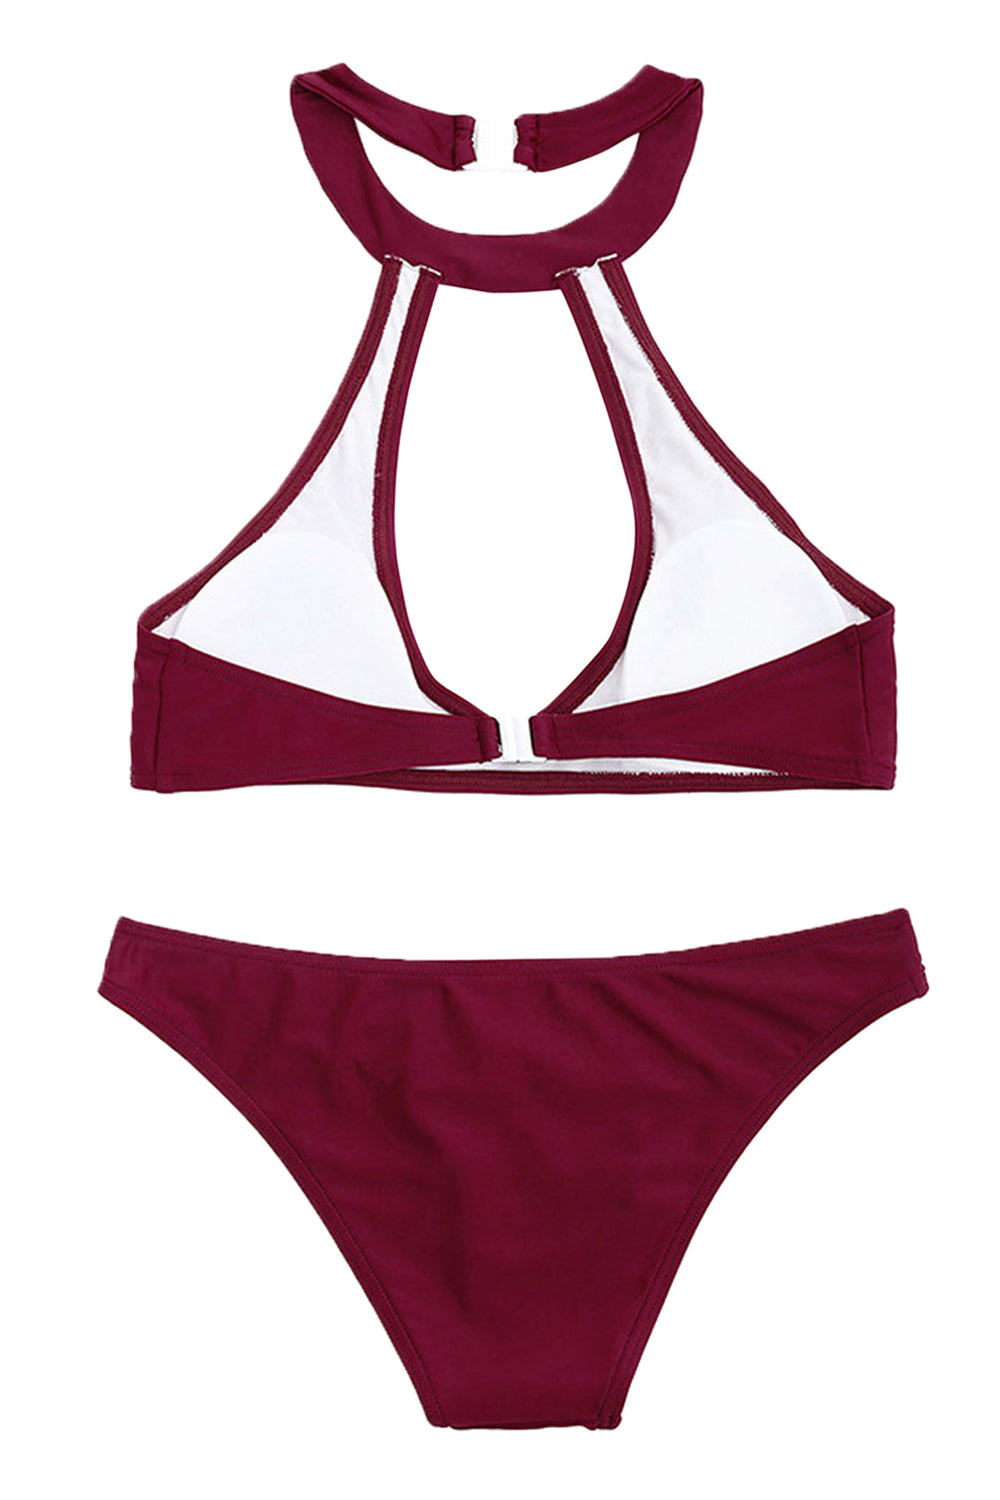 Iyasson Sexy Solid-color Hollow out Bikini Sets